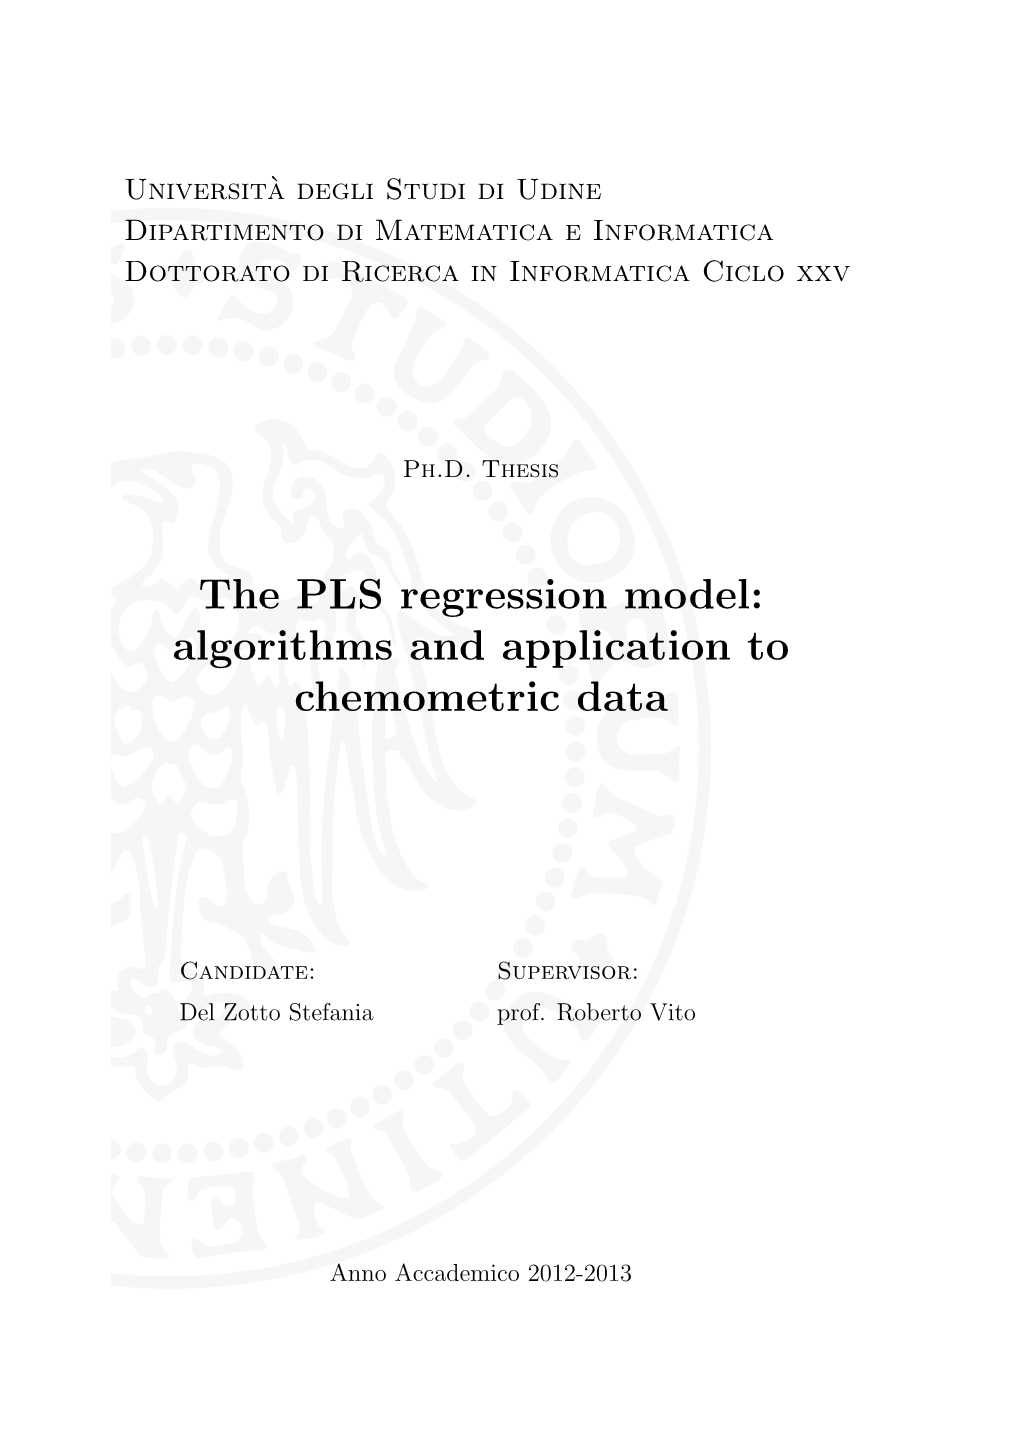 The PLS Regression Model: Algorithms and Application to Chemometric Data